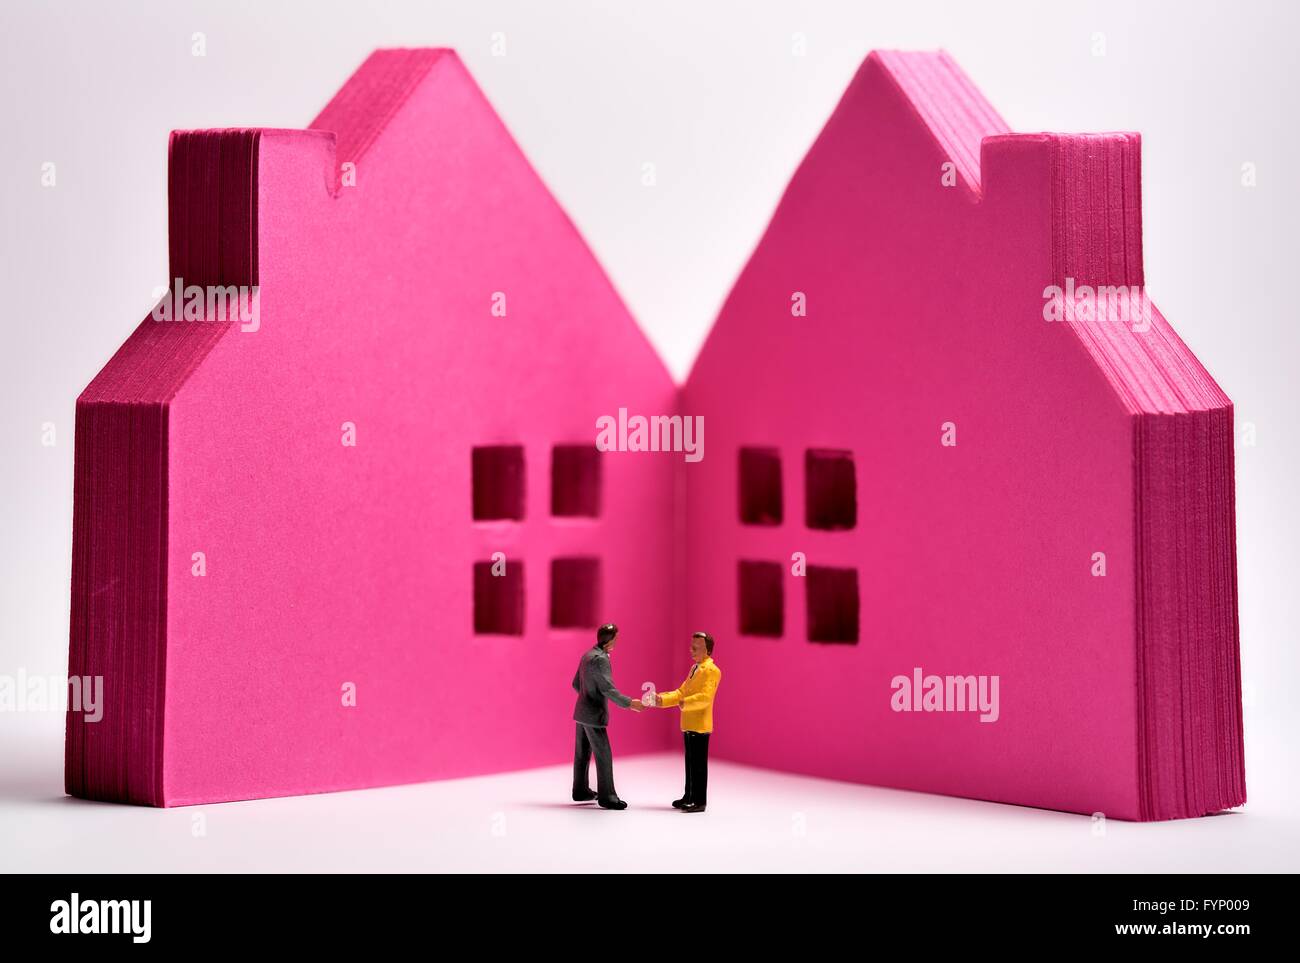 Pink post it notes in the shape of  houses with miniature figurine business men shaking hands Stock Photo